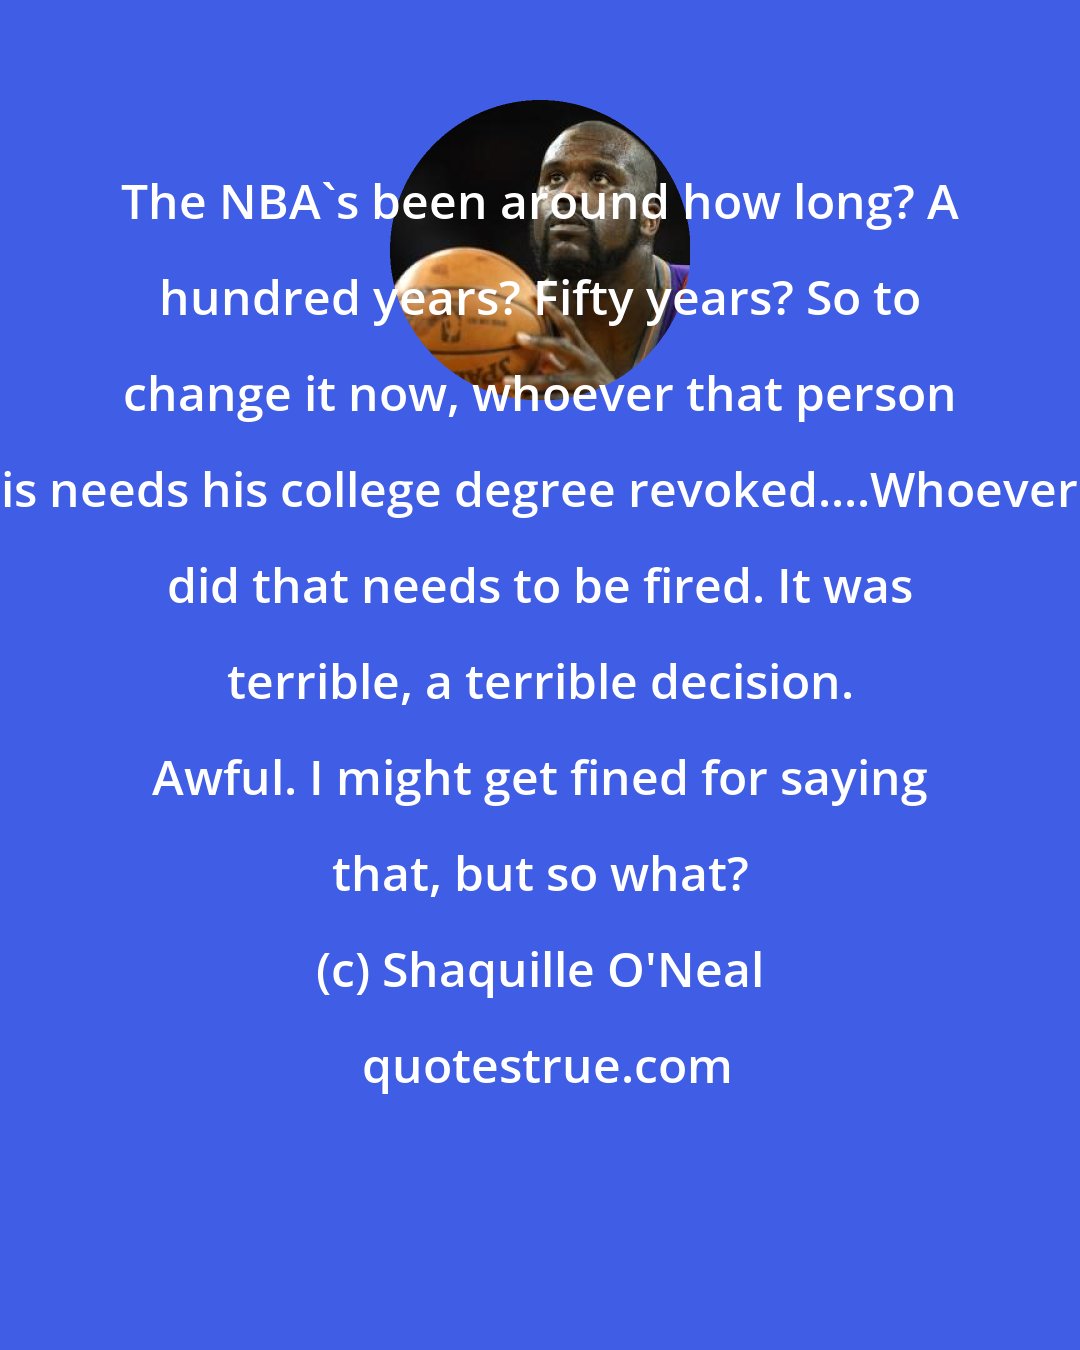 Shaquille O'Neal: The NBA's been around how long? A hundred years? Fifty years? So to change it now, whoever that person is needs his college degree revoked....Whoever did that needs to be fired. It was terrible, a terrible decision. Awful. I might get fined for saying that, but so what?